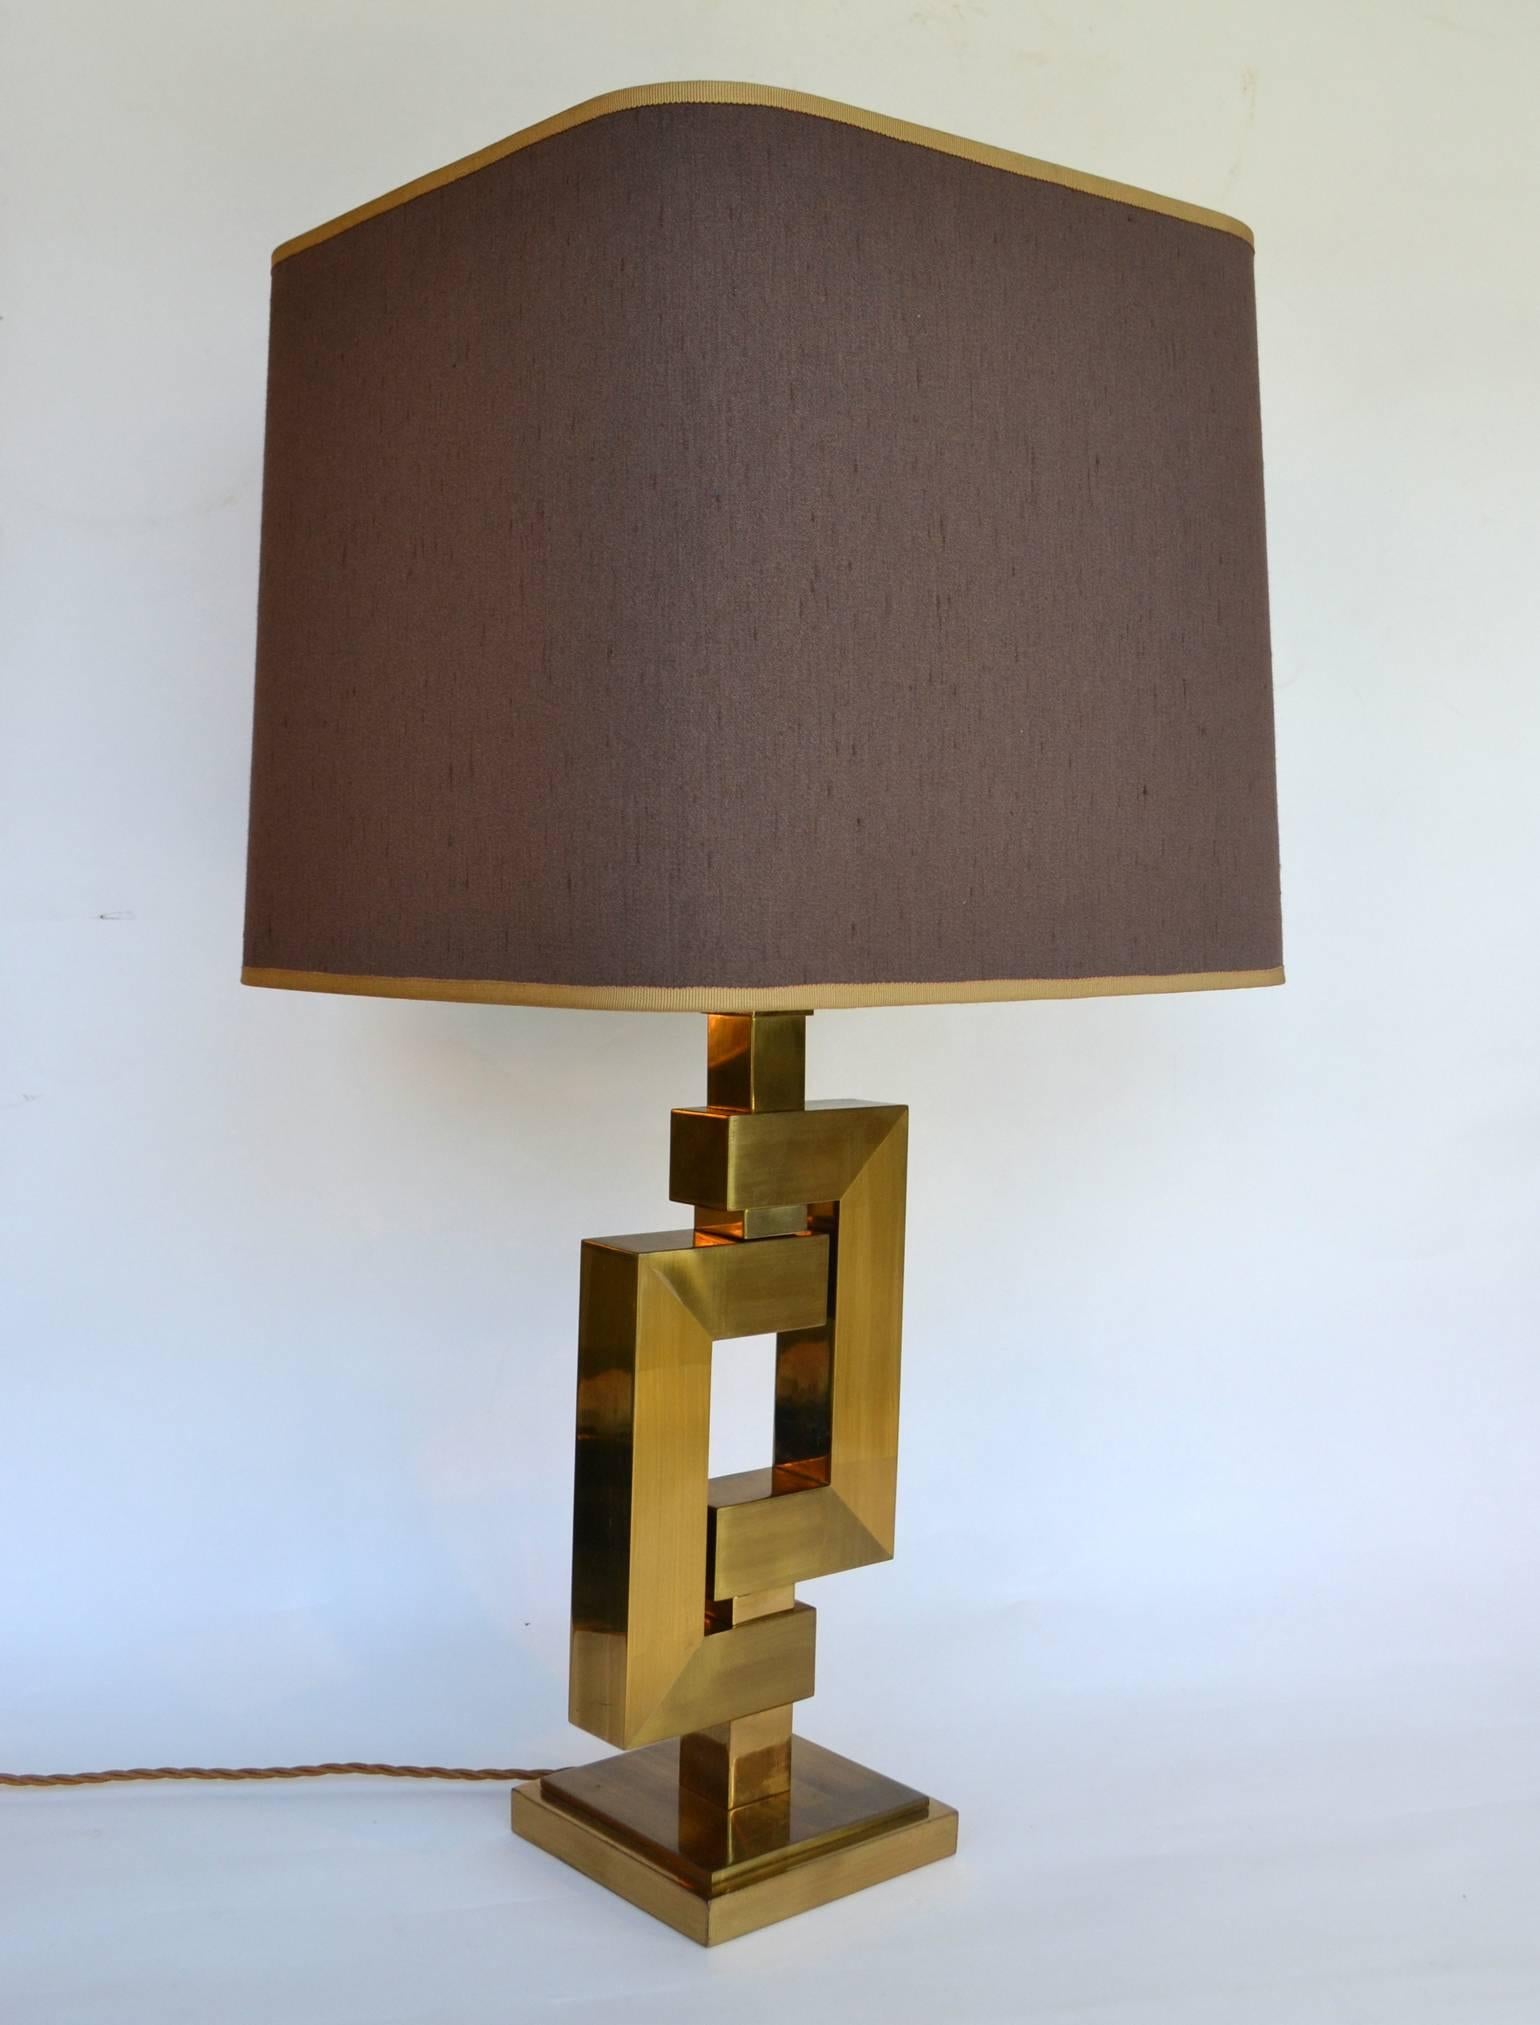 Pair of Sculptural Geometric Brass Table Lamps by Willy Rizzo for Romeo Rega 1